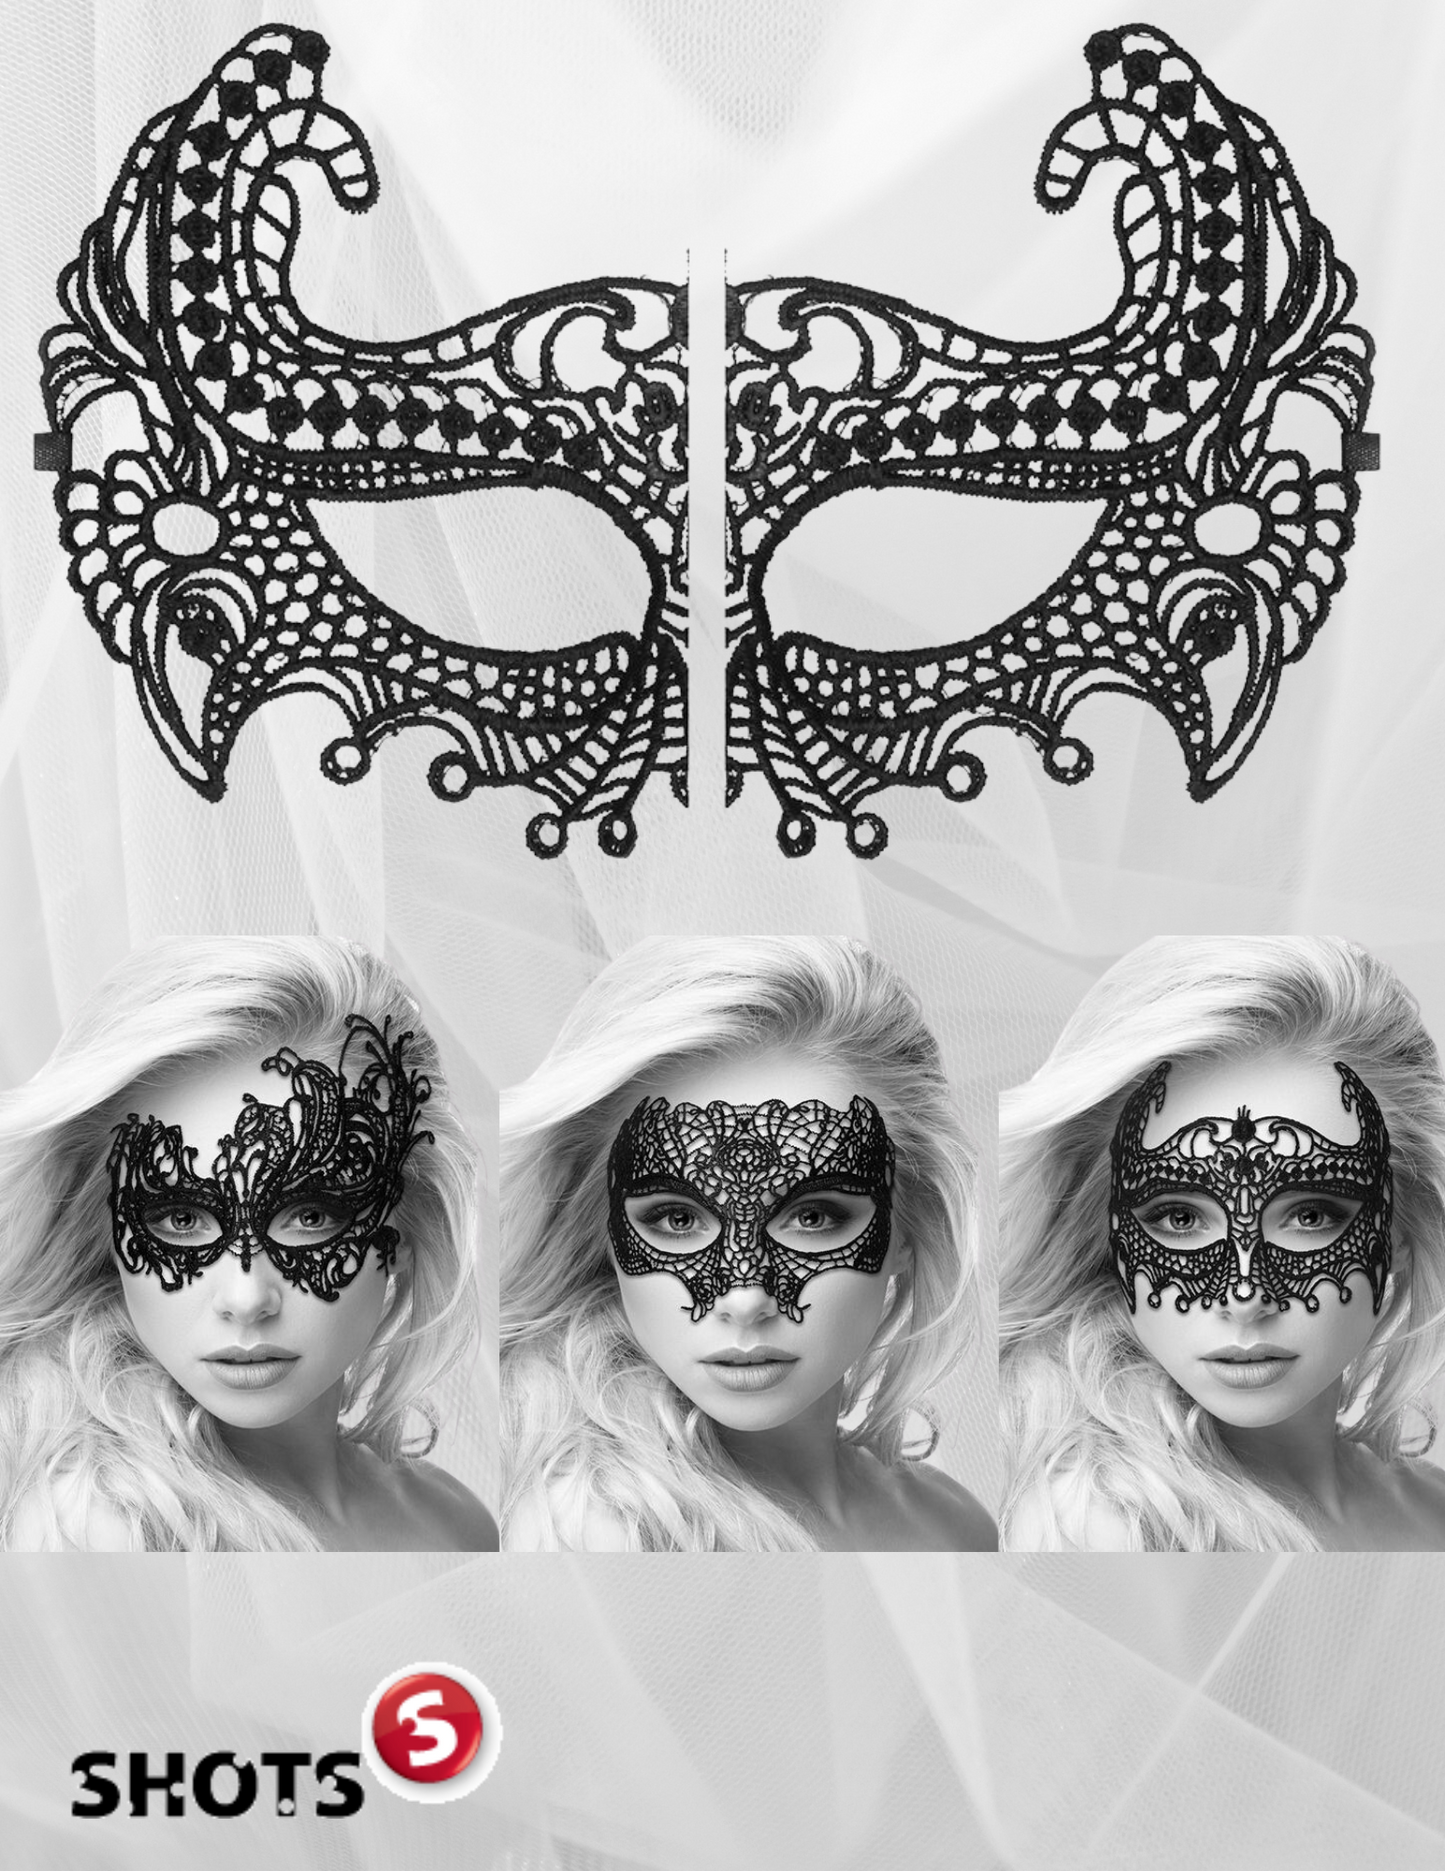 Ad for 3 of the styles of Lace Eye Masks from Ouch! by Shots America.